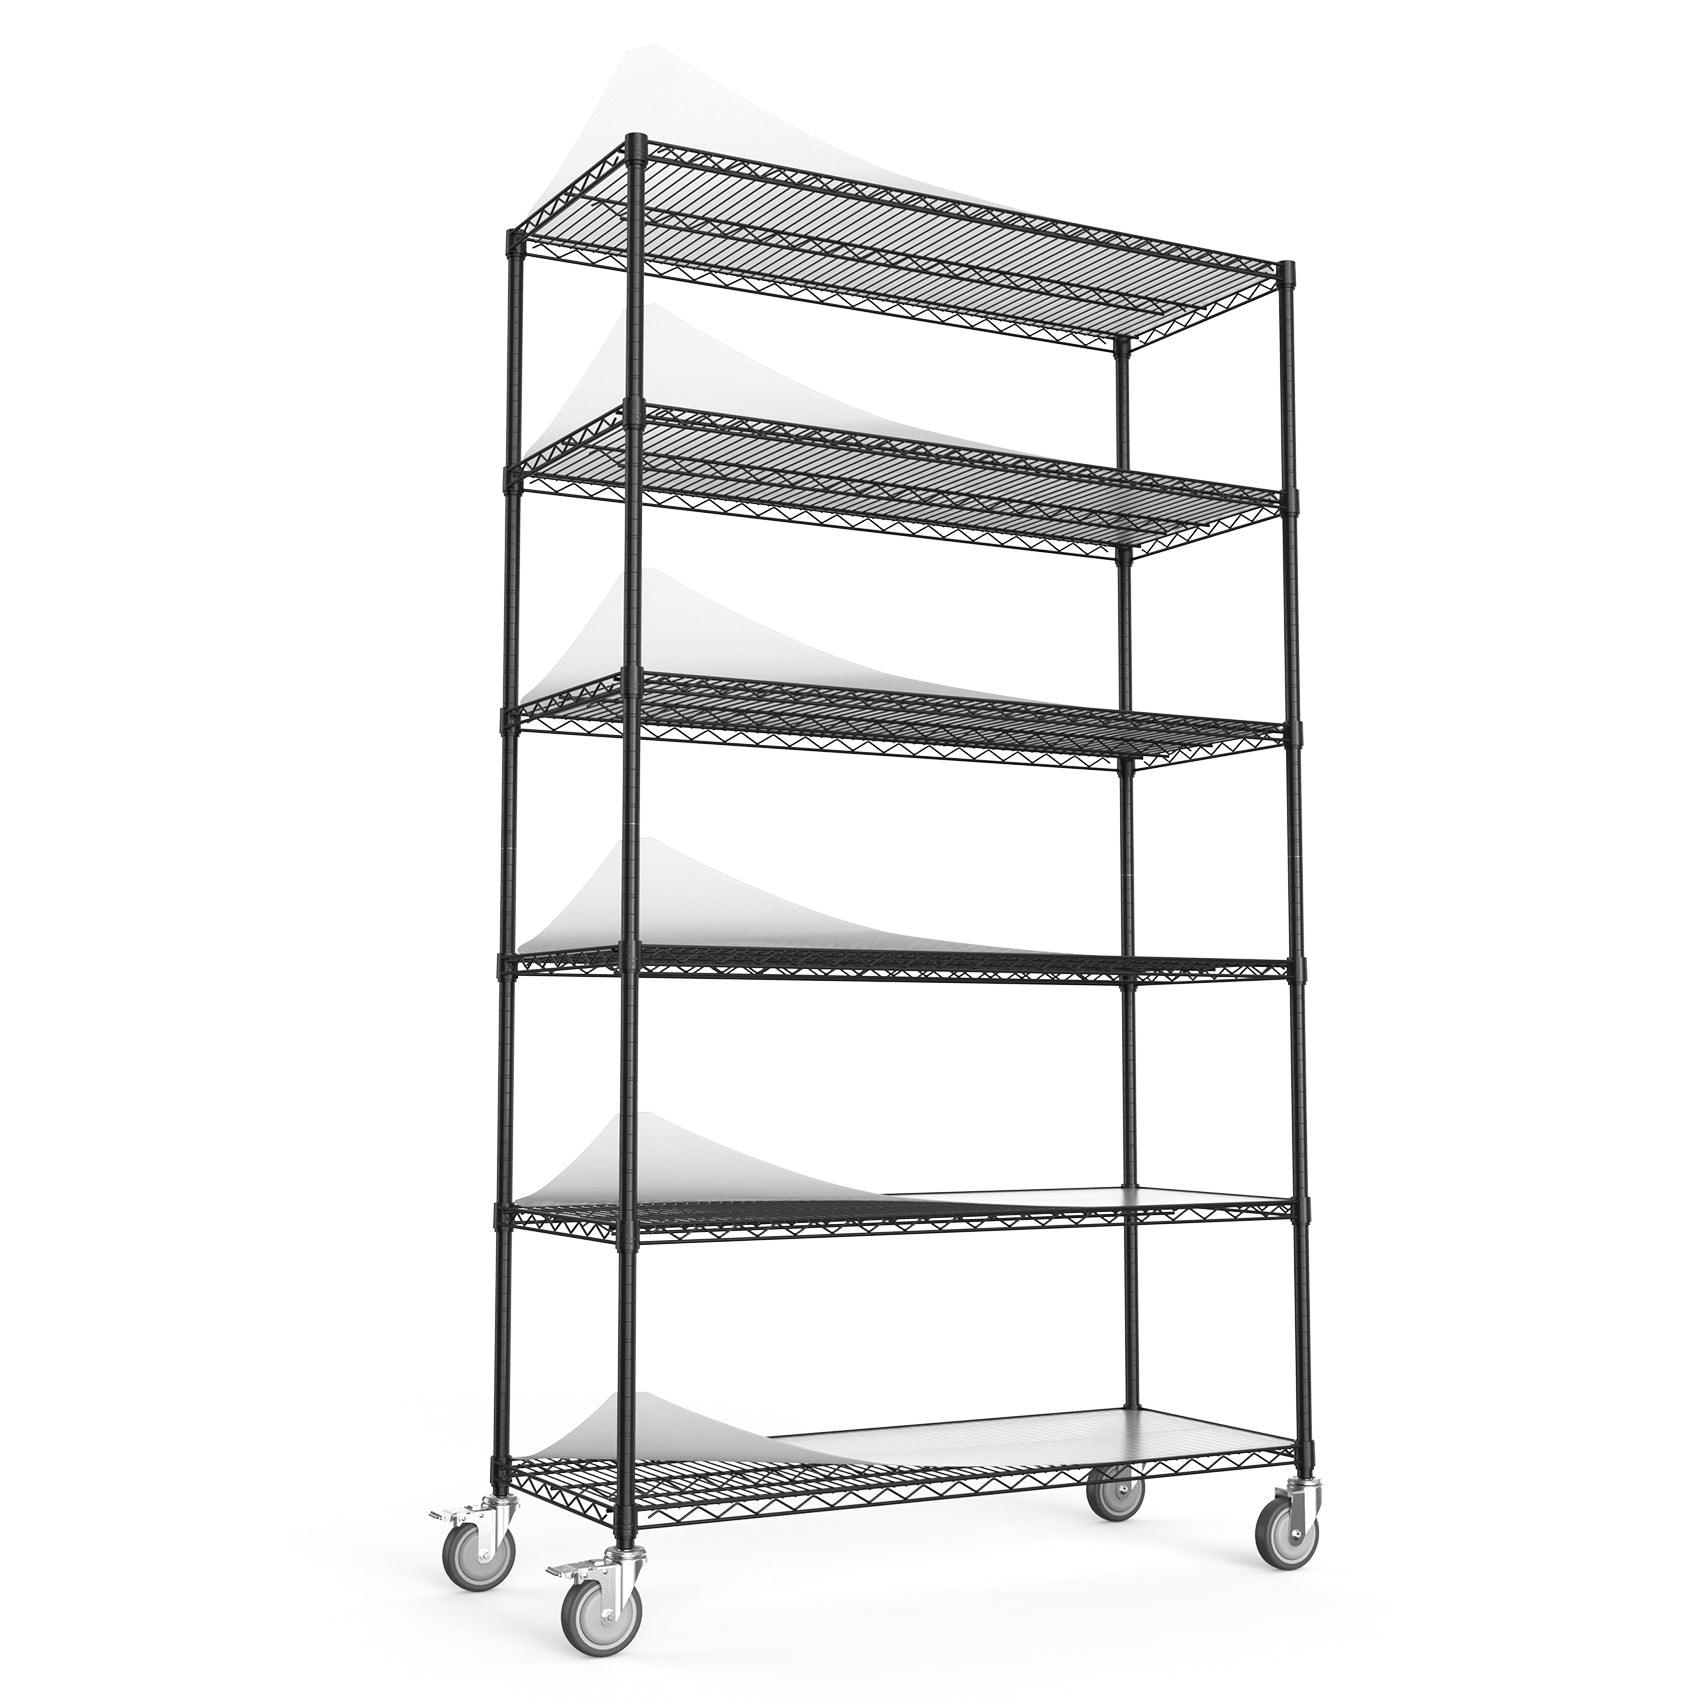 6 Tier Wire Shelving Unit, 6000 LBS NSF Height Adjustable Metal Garage Storage Shelves with Wheels, Heavy Duty Storage Wire Rack Metal Shelves - Black LamCham